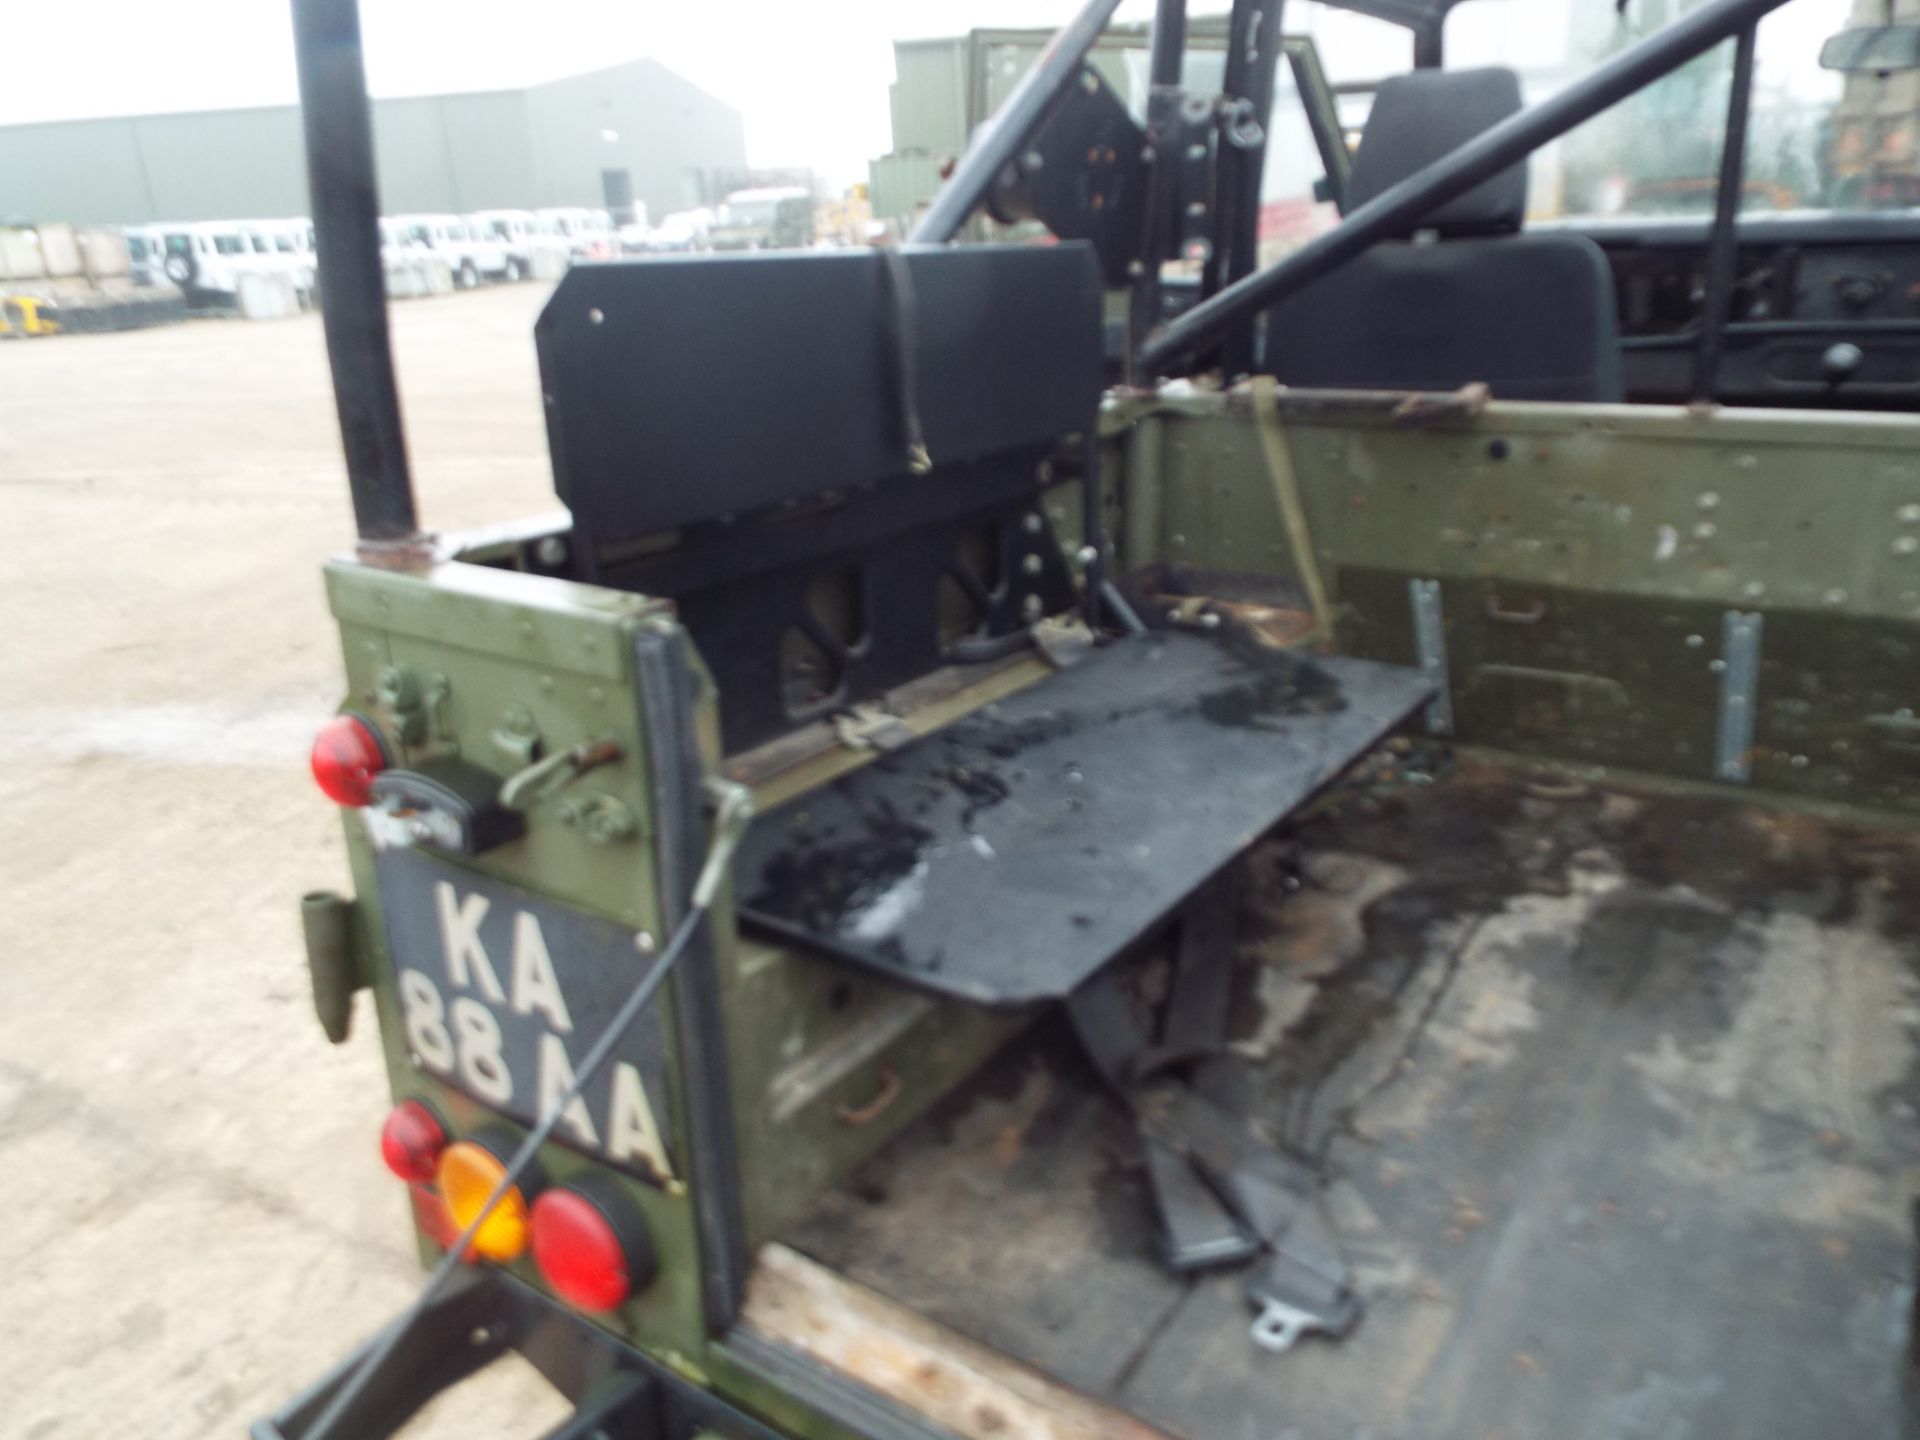 Military Specification Land Rover Wolf 90 Soft Top - Image 19 of 25